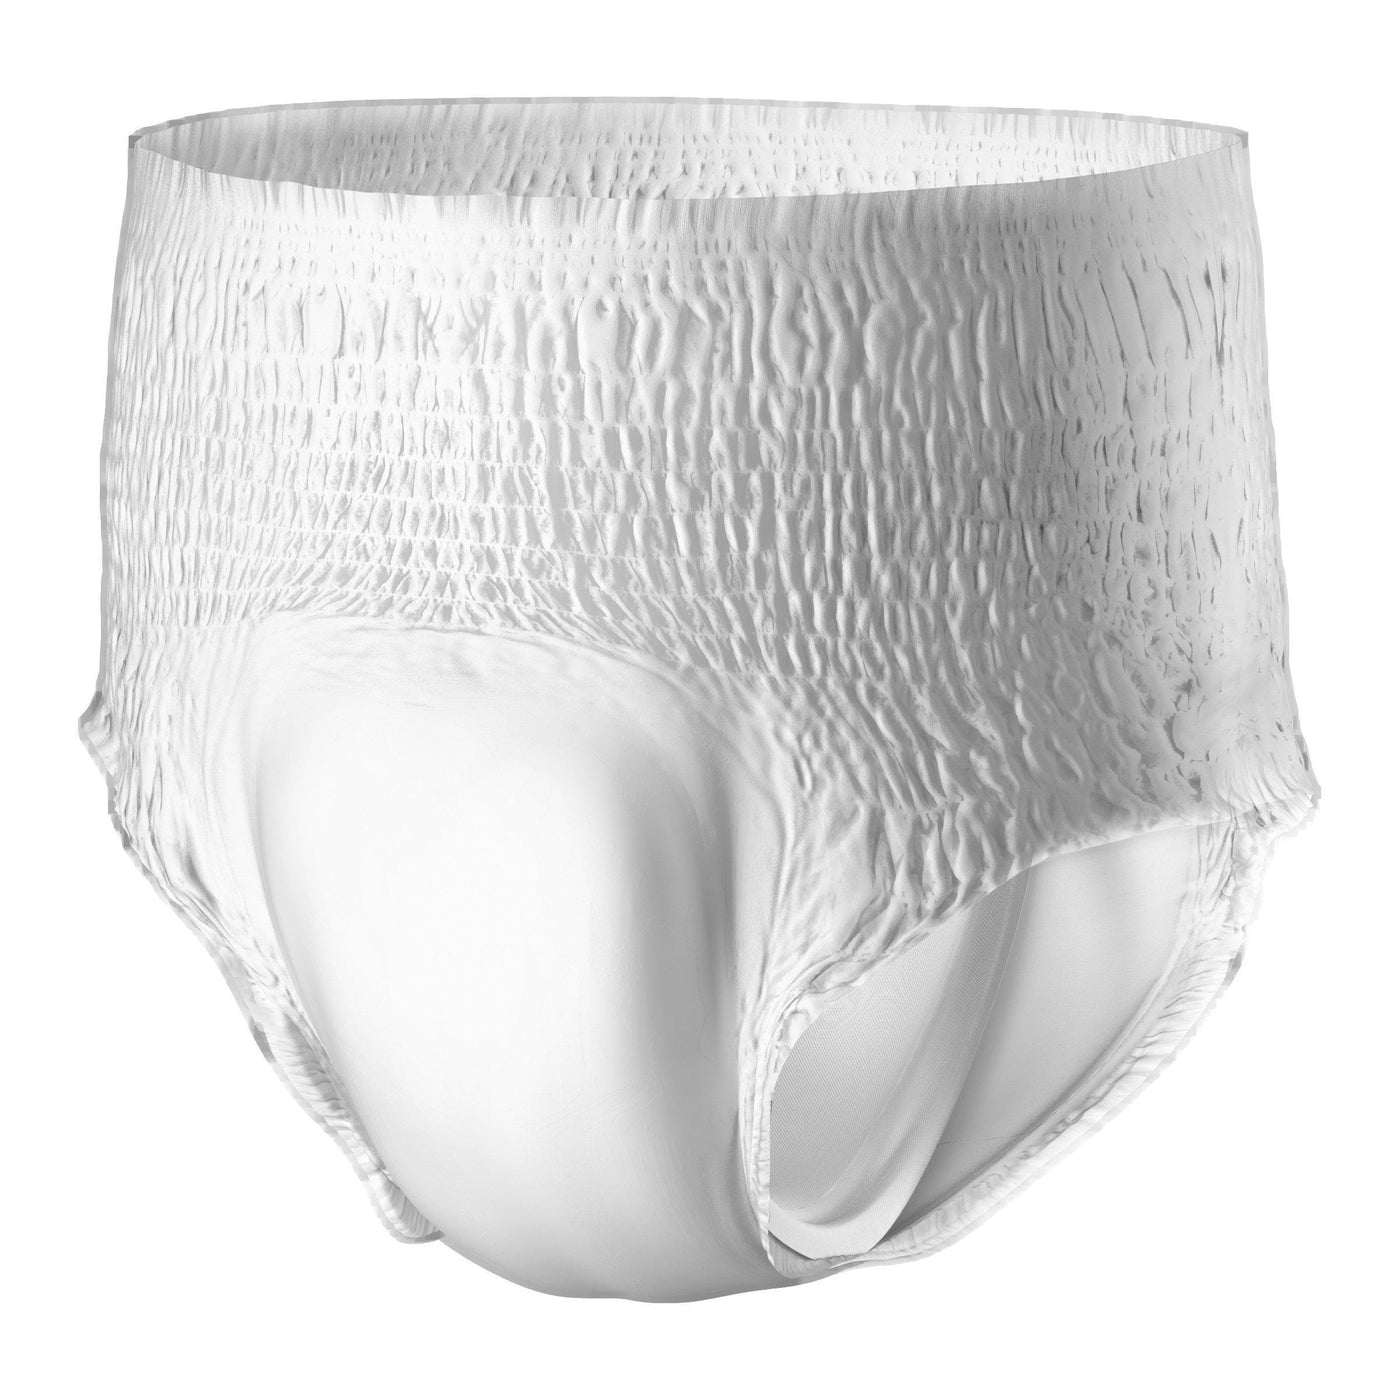 Prevail Daily Underwear Package of 22 Count Youth/Small 20 - 34 -  National Chamber of Exporters of Sri Lanka